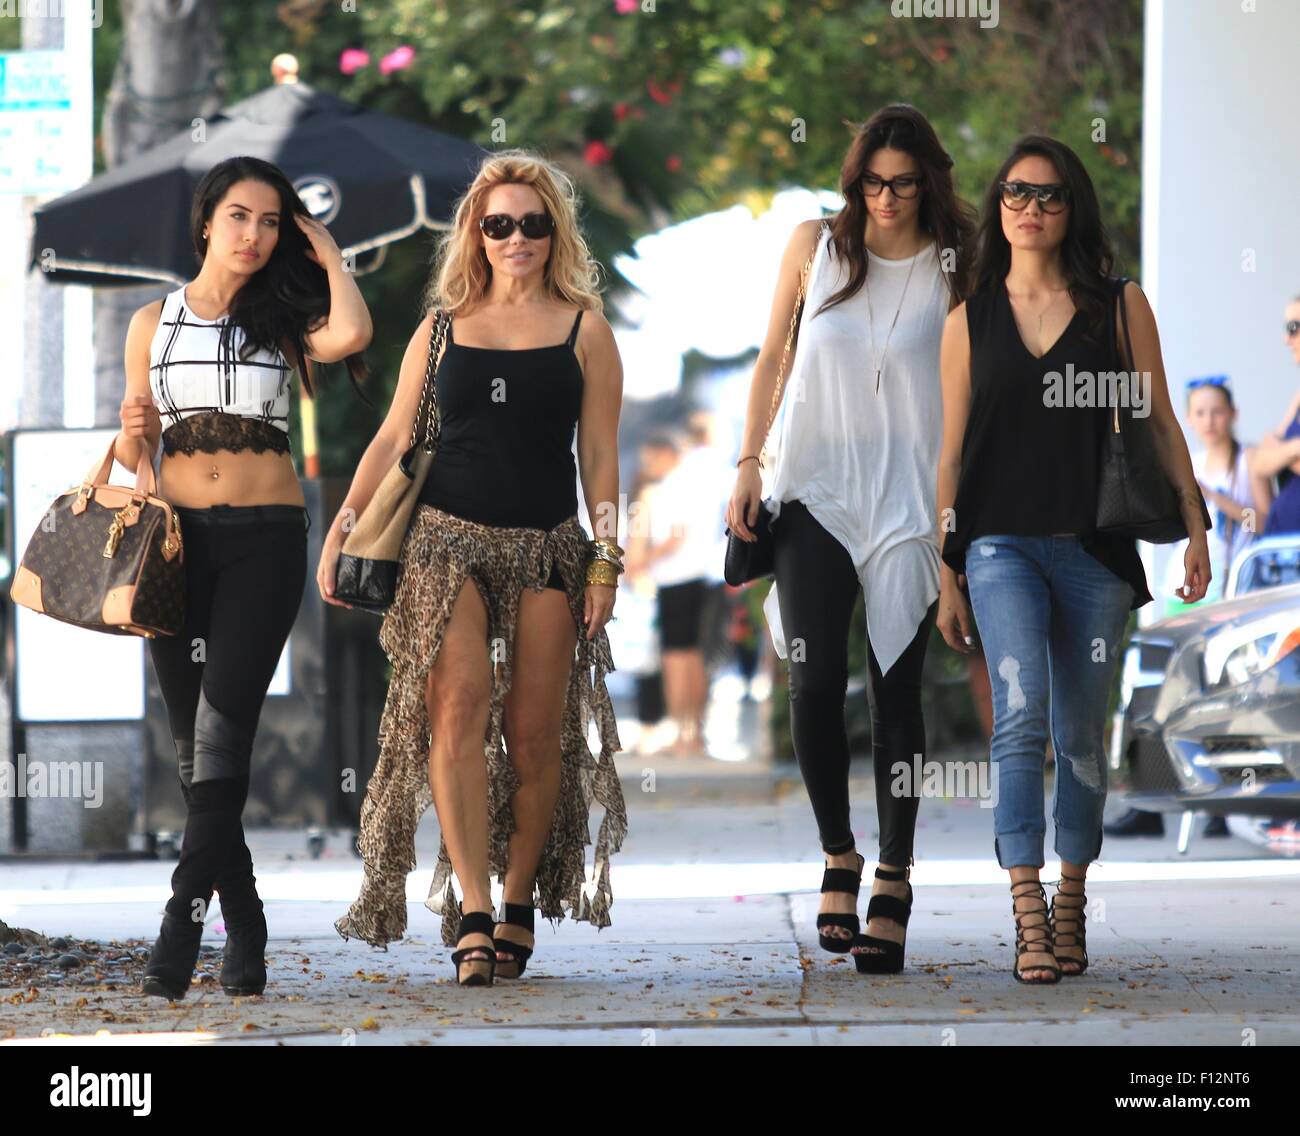 'Check Point' cast members sighted on Robertson Boulevard in West Hollywood  Featuring: Nasia Jansen, Stephanie Landrum, Olga Safari, Michelle Lee Where: Los Angeles, California, United States When: 24 Jun 2015 Stock Photo